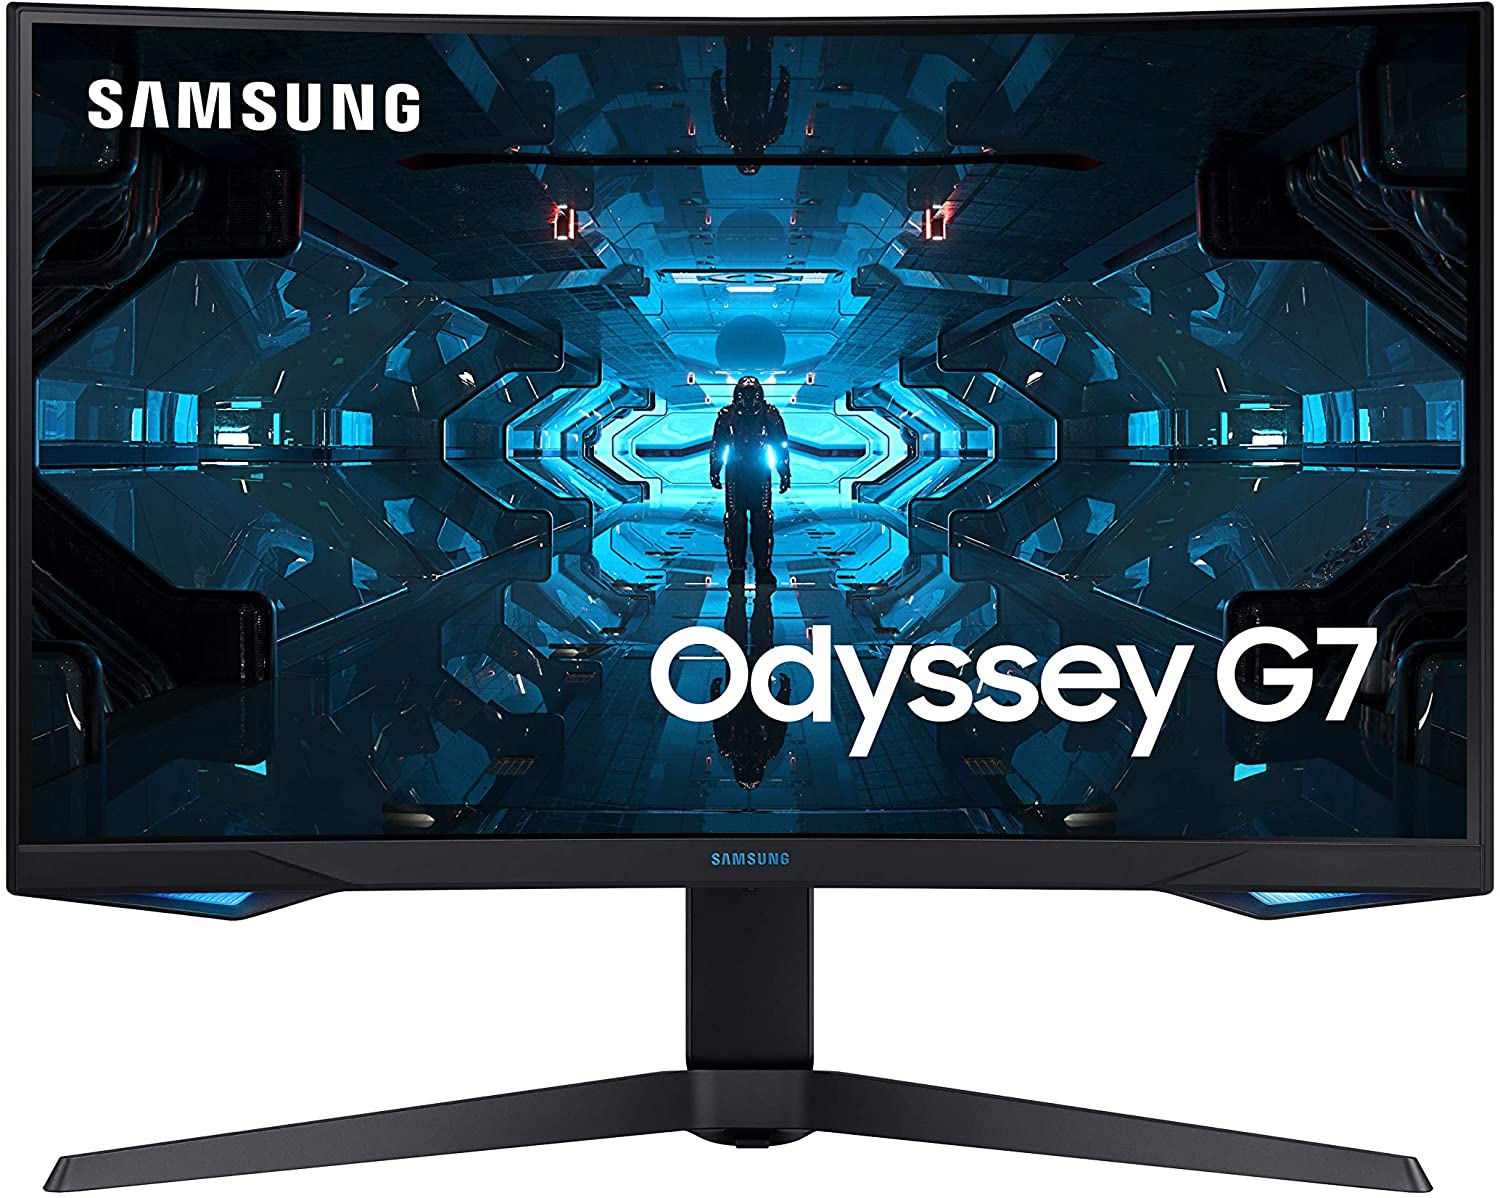 The Samsung Odyssey G7 is a fantastic curved gaming monitor.